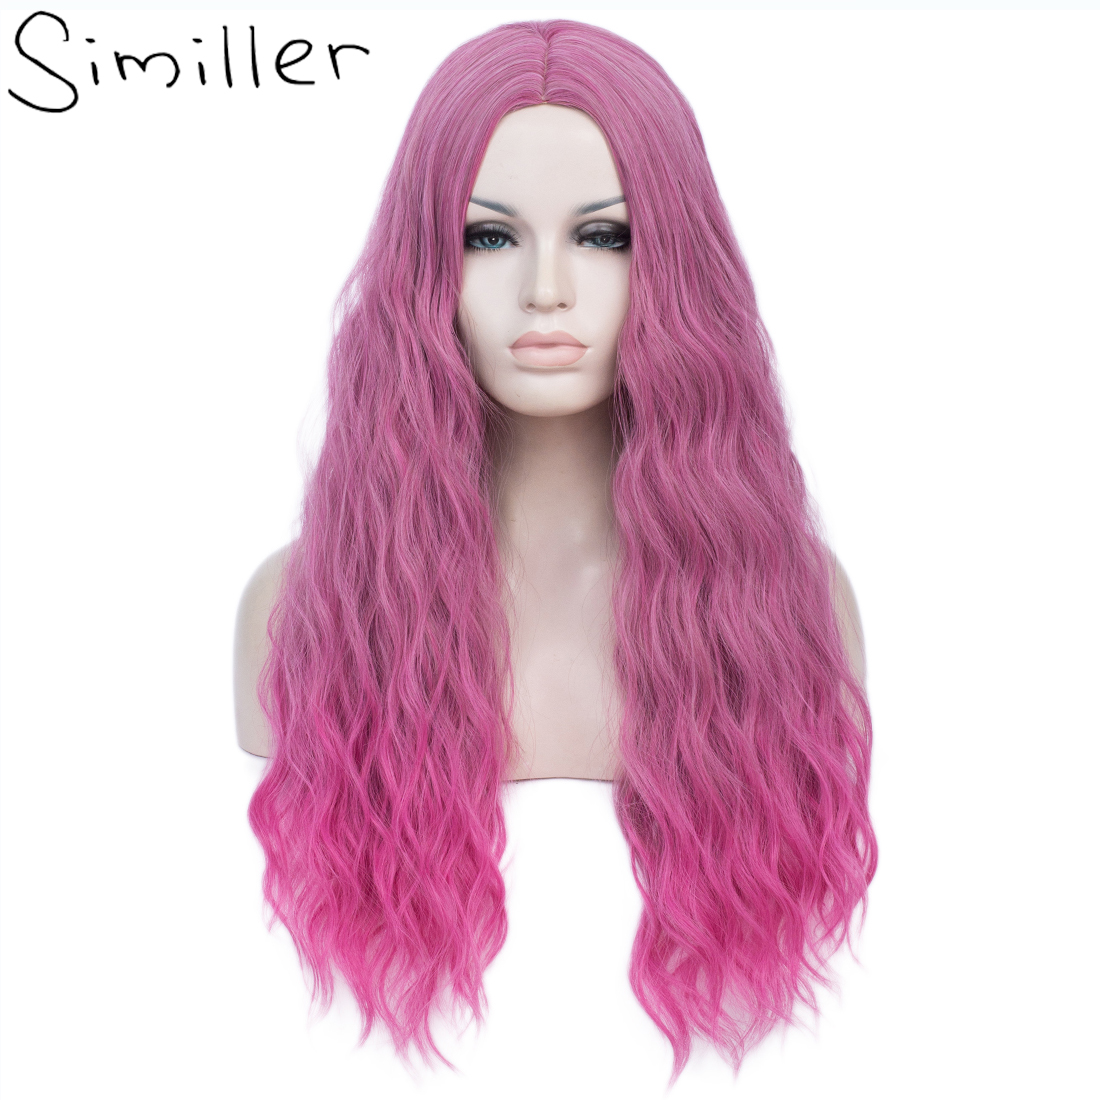 Similler Halloween Costume Long Synthetic Wig for Women Curly Purple Rose Red Ombre Cosplay Wig Heat Resistance Hair